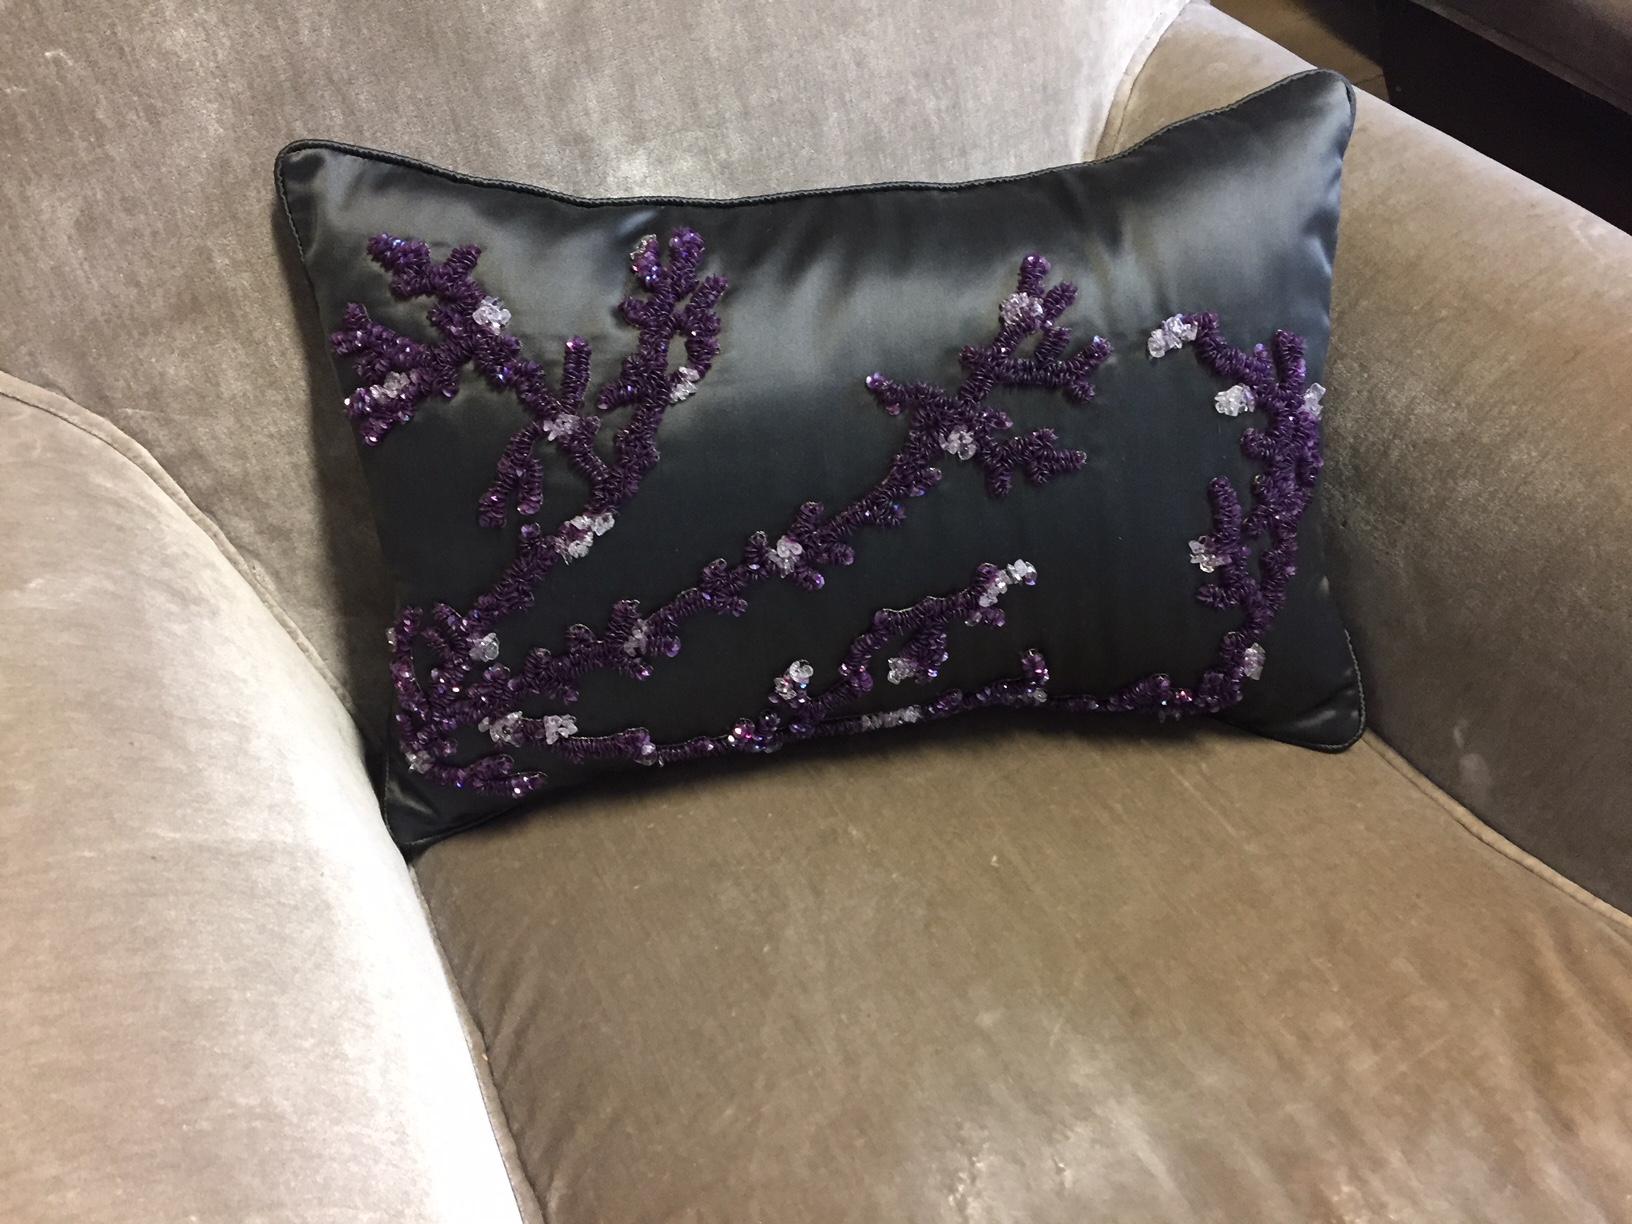 Cushion silk satin col. khaki with coral design hand embroidery col. purple sequins and semi-precious stone, size: 30 cm x 45 cm, cushion cover with cotton lining, feather inner 100% new goose feathers.